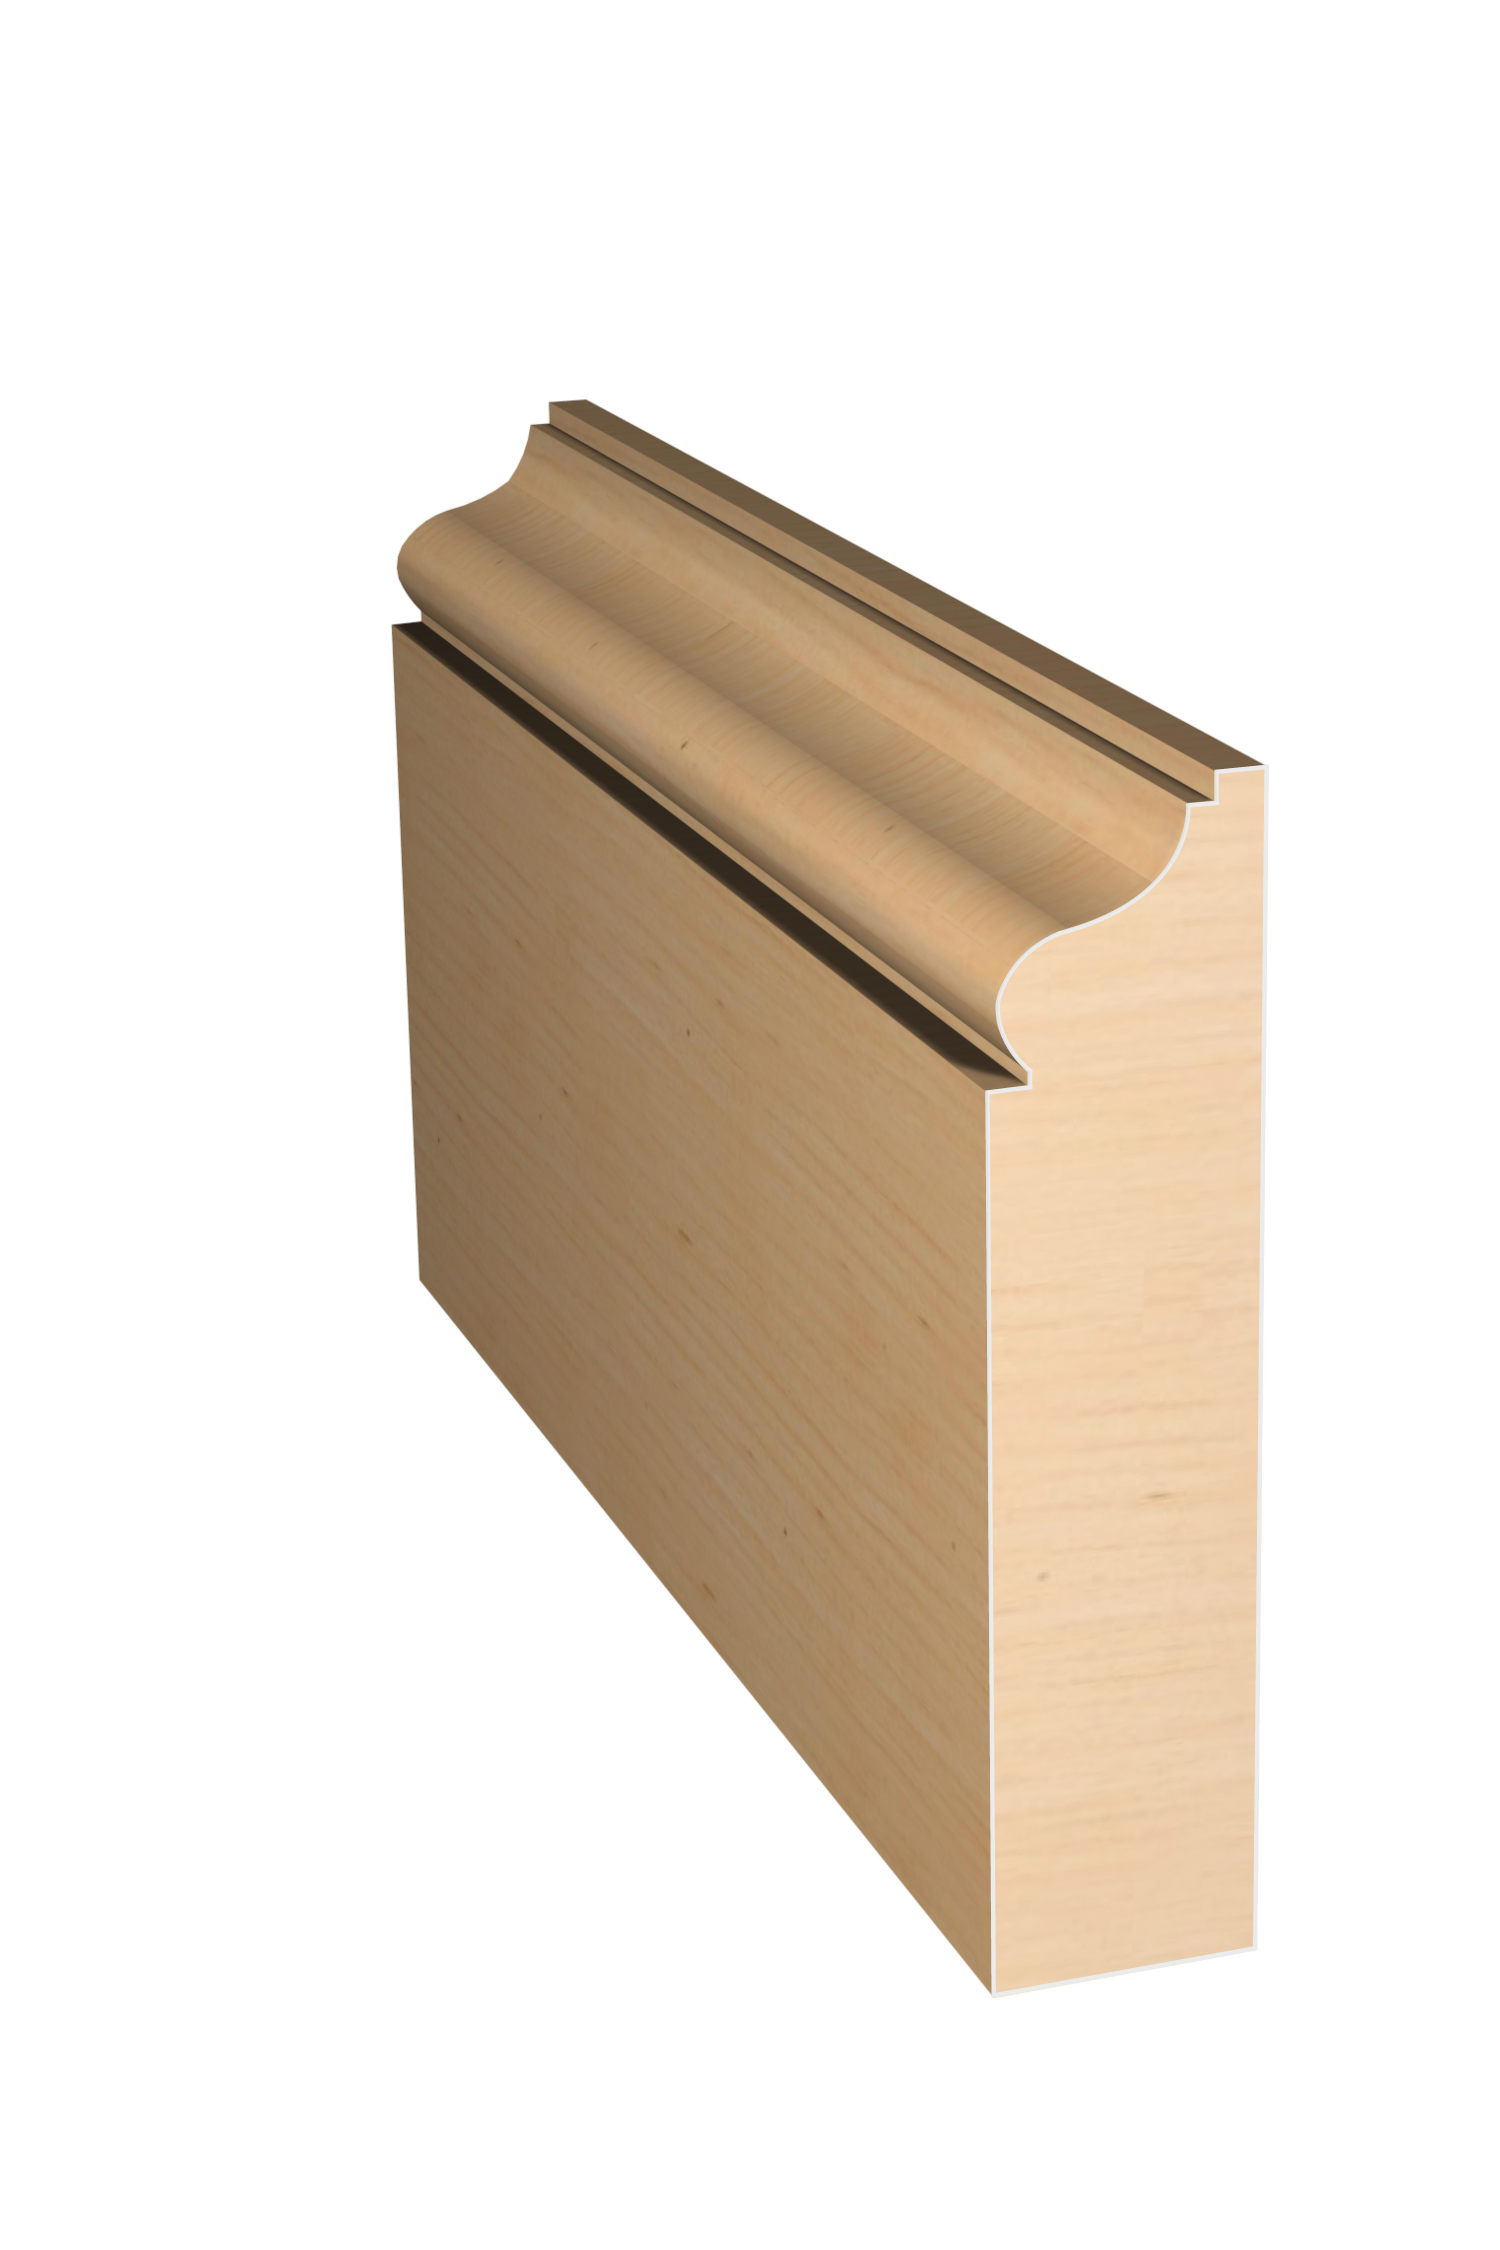 Three dimensional rendering of custom casing wood molding CAPL31412 made by Public Lumber Company in Detroit.